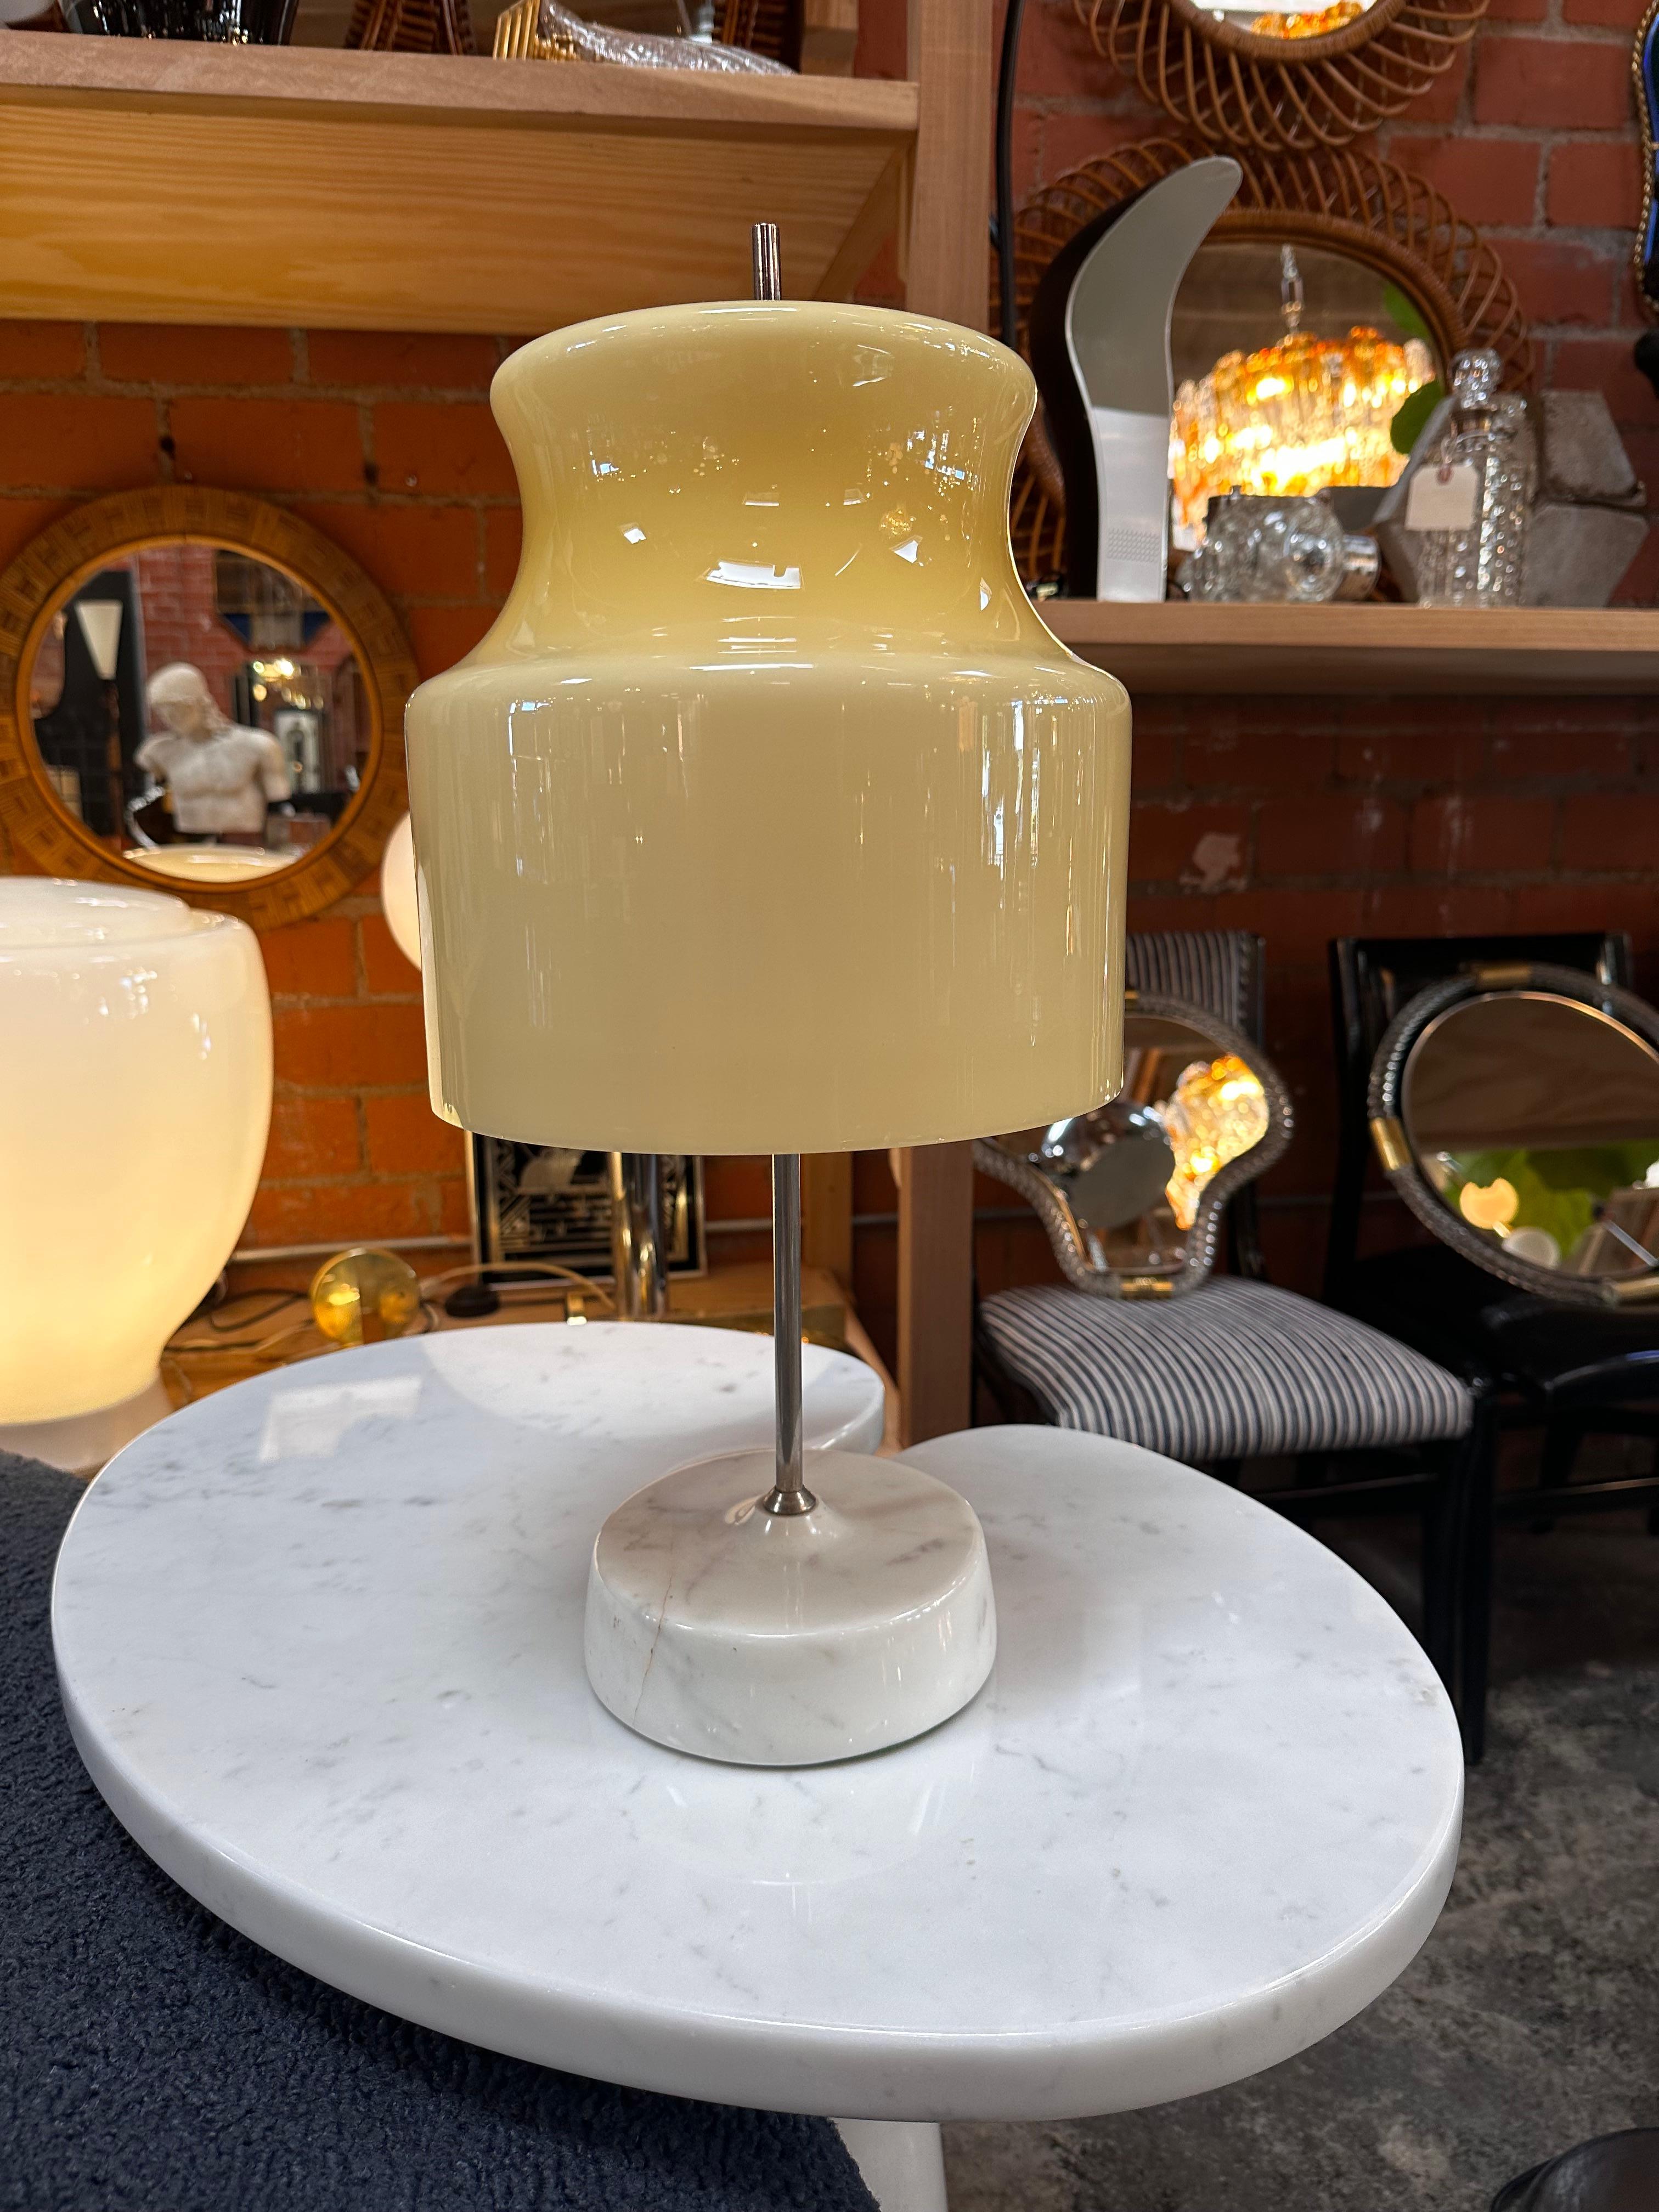 Illuminate your space with sophistication using our Vintage Italian Unique Marble and Glass Table Lamp from the 1980s. Featuring a round marble base, a delicate glass shade, and a sleek chrome stand, this lamp seamlessly blends elegance and modern